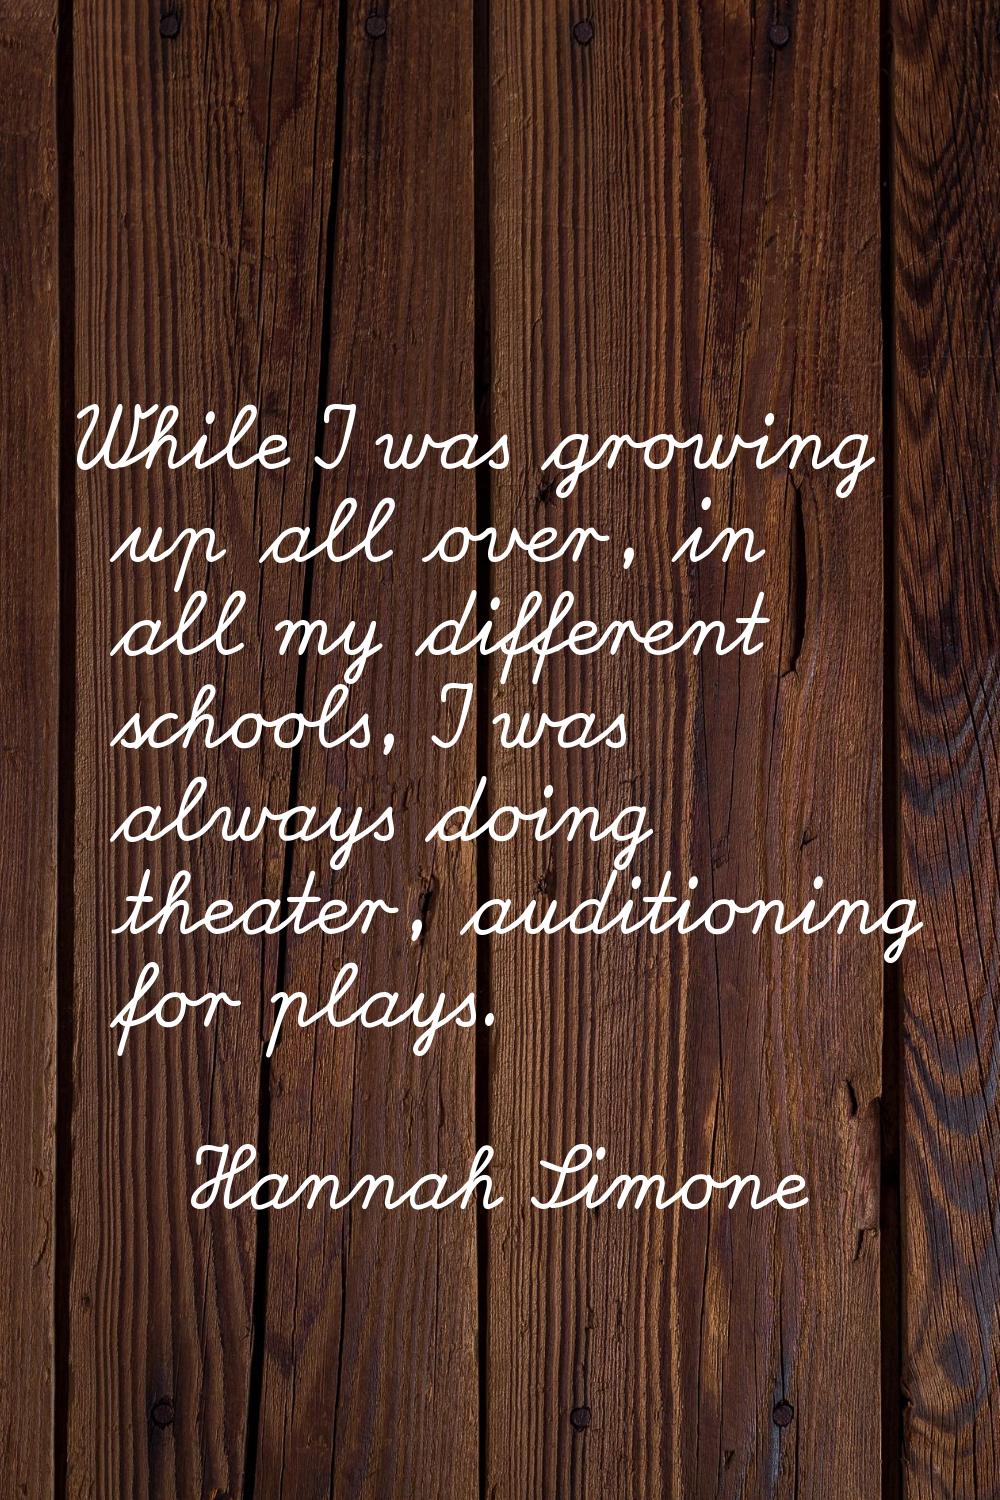 While I was growing up all over, in all my different schools, I was always doing theater, auditioni